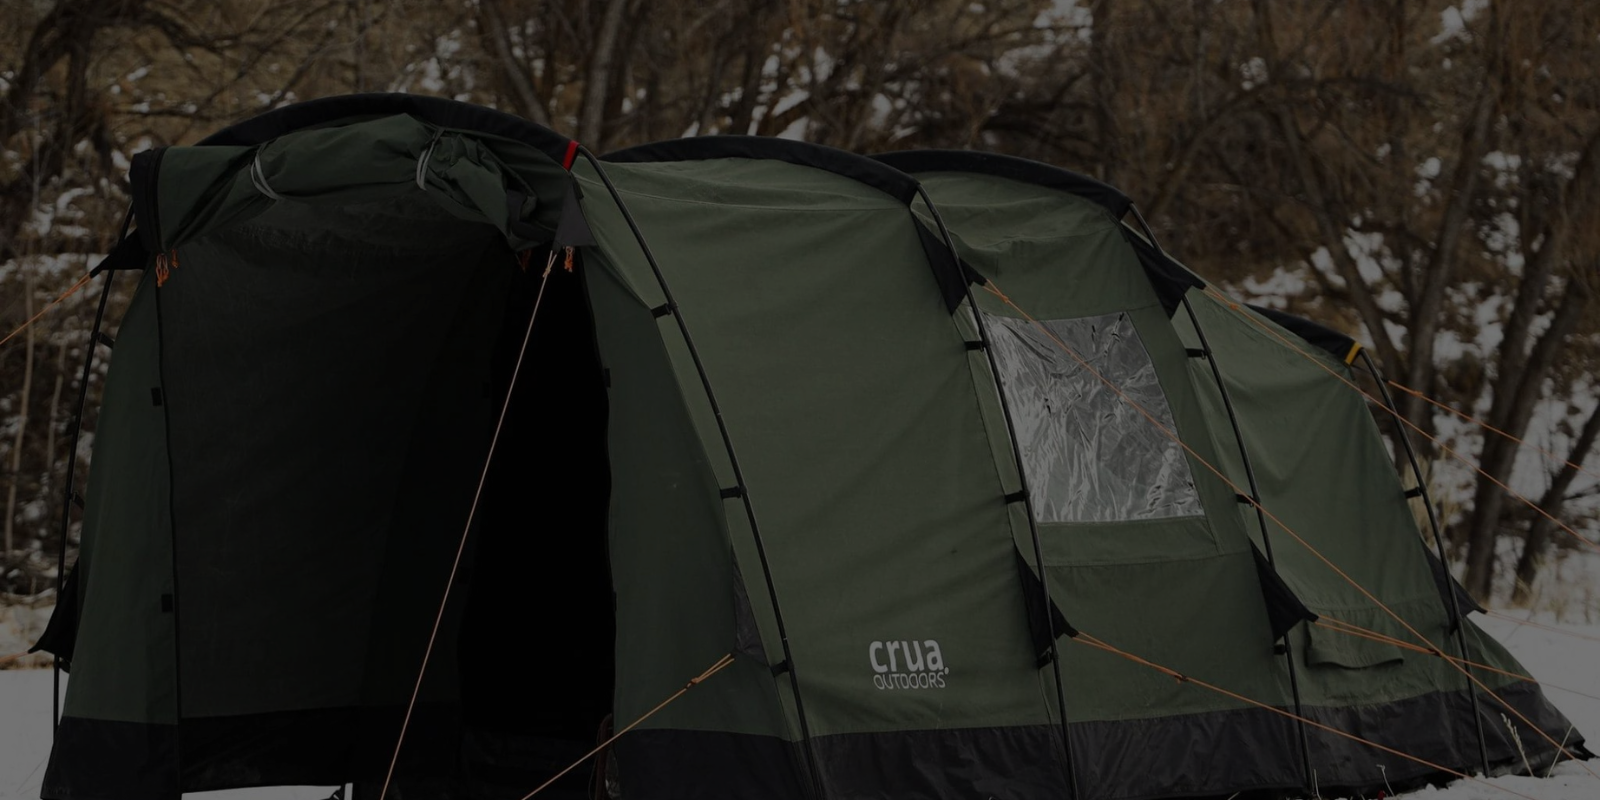 Did I Find The Best Camping Tent Ever? The Crua Tri Insulated Tent